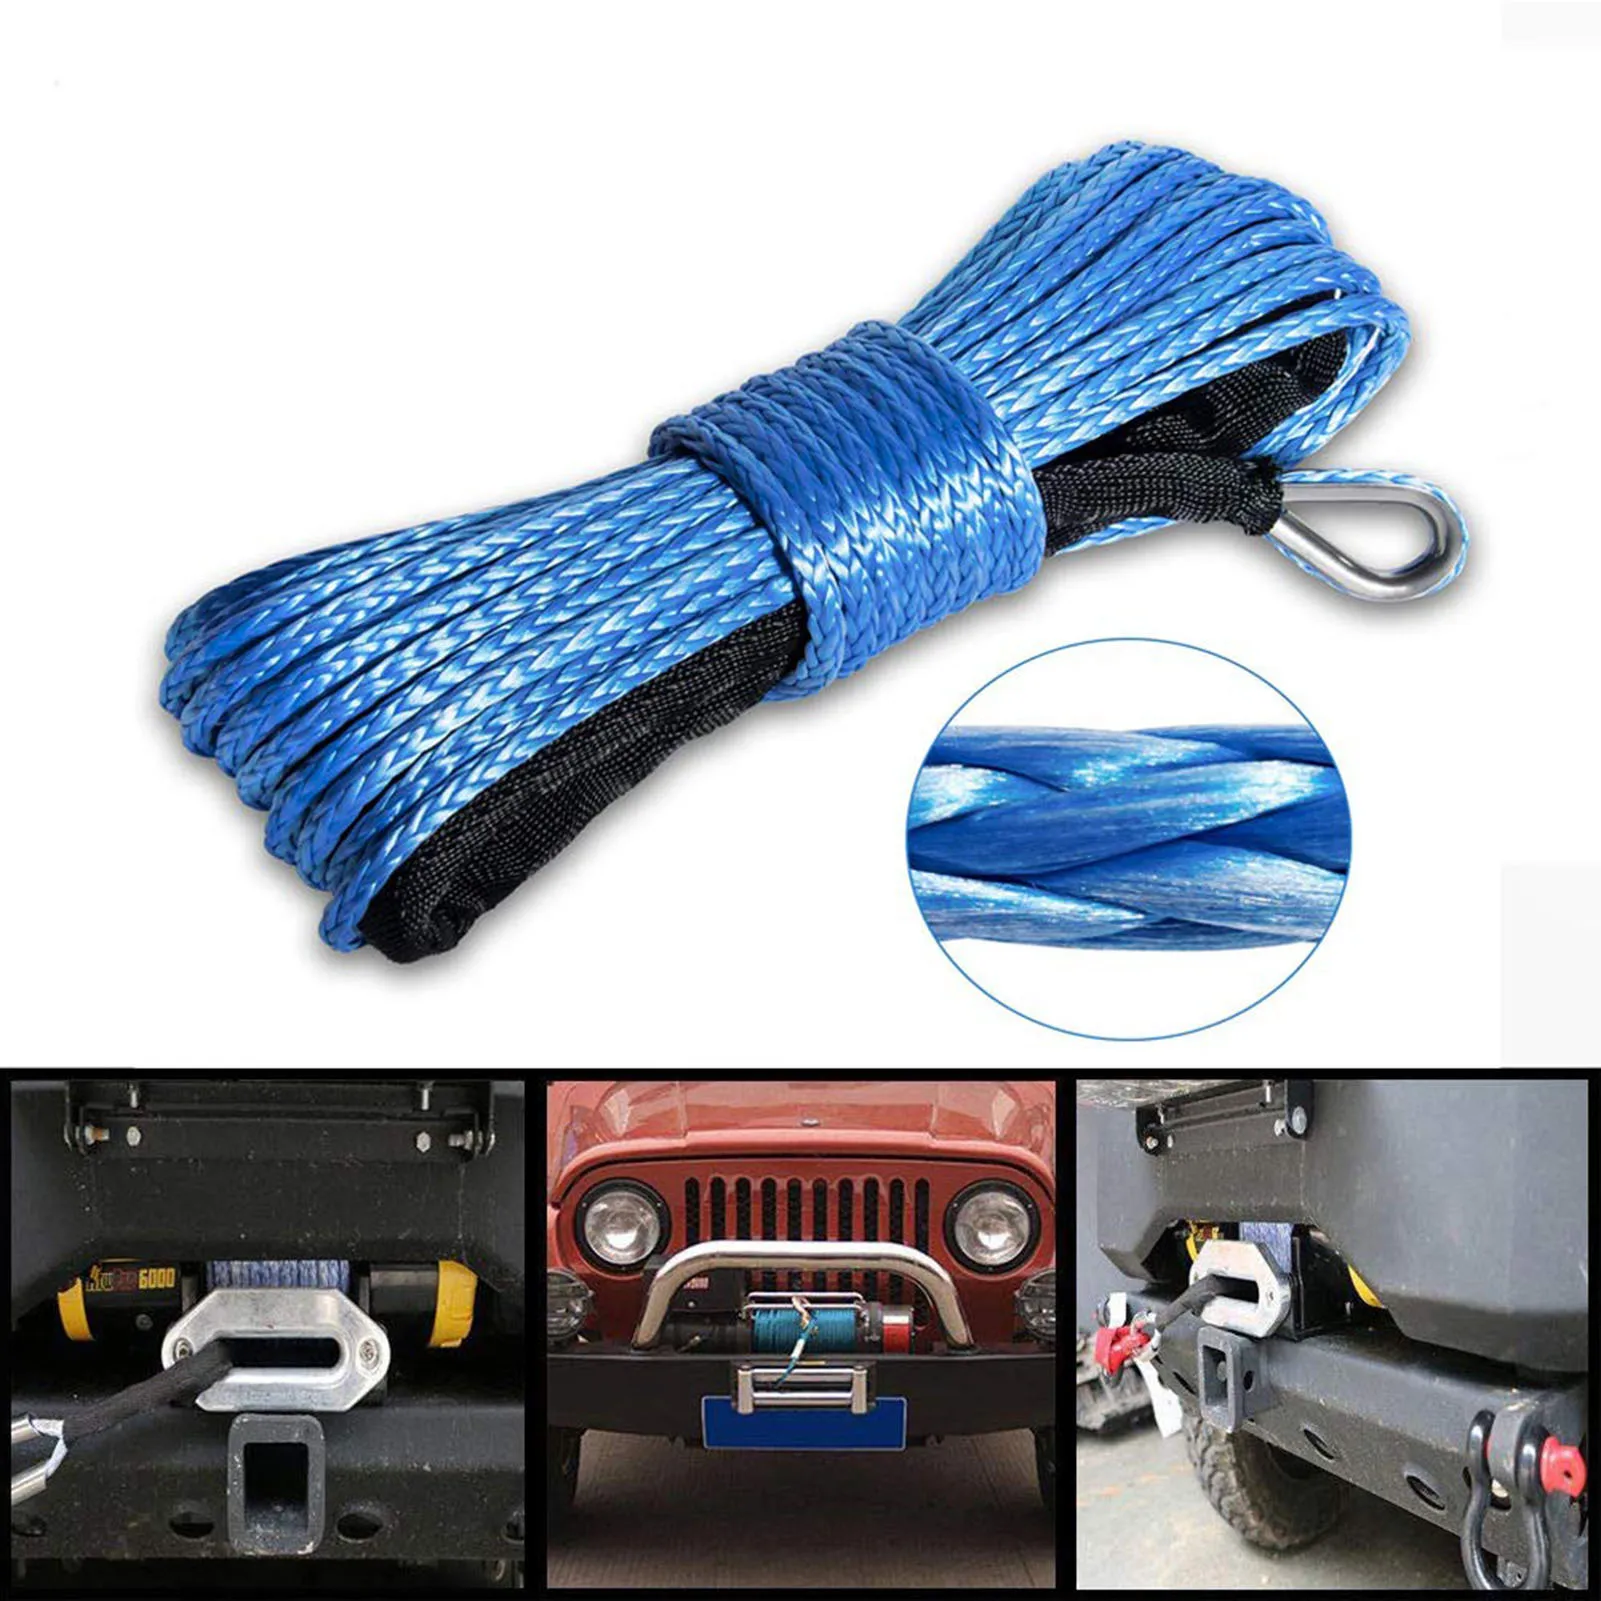 

15m x 6mm Synthetic Winch Rope 7700Lbs Trailer Winch Rope With Hook Towing Rope For ATV UTV Truck Boat 3 Colors 12 Shares